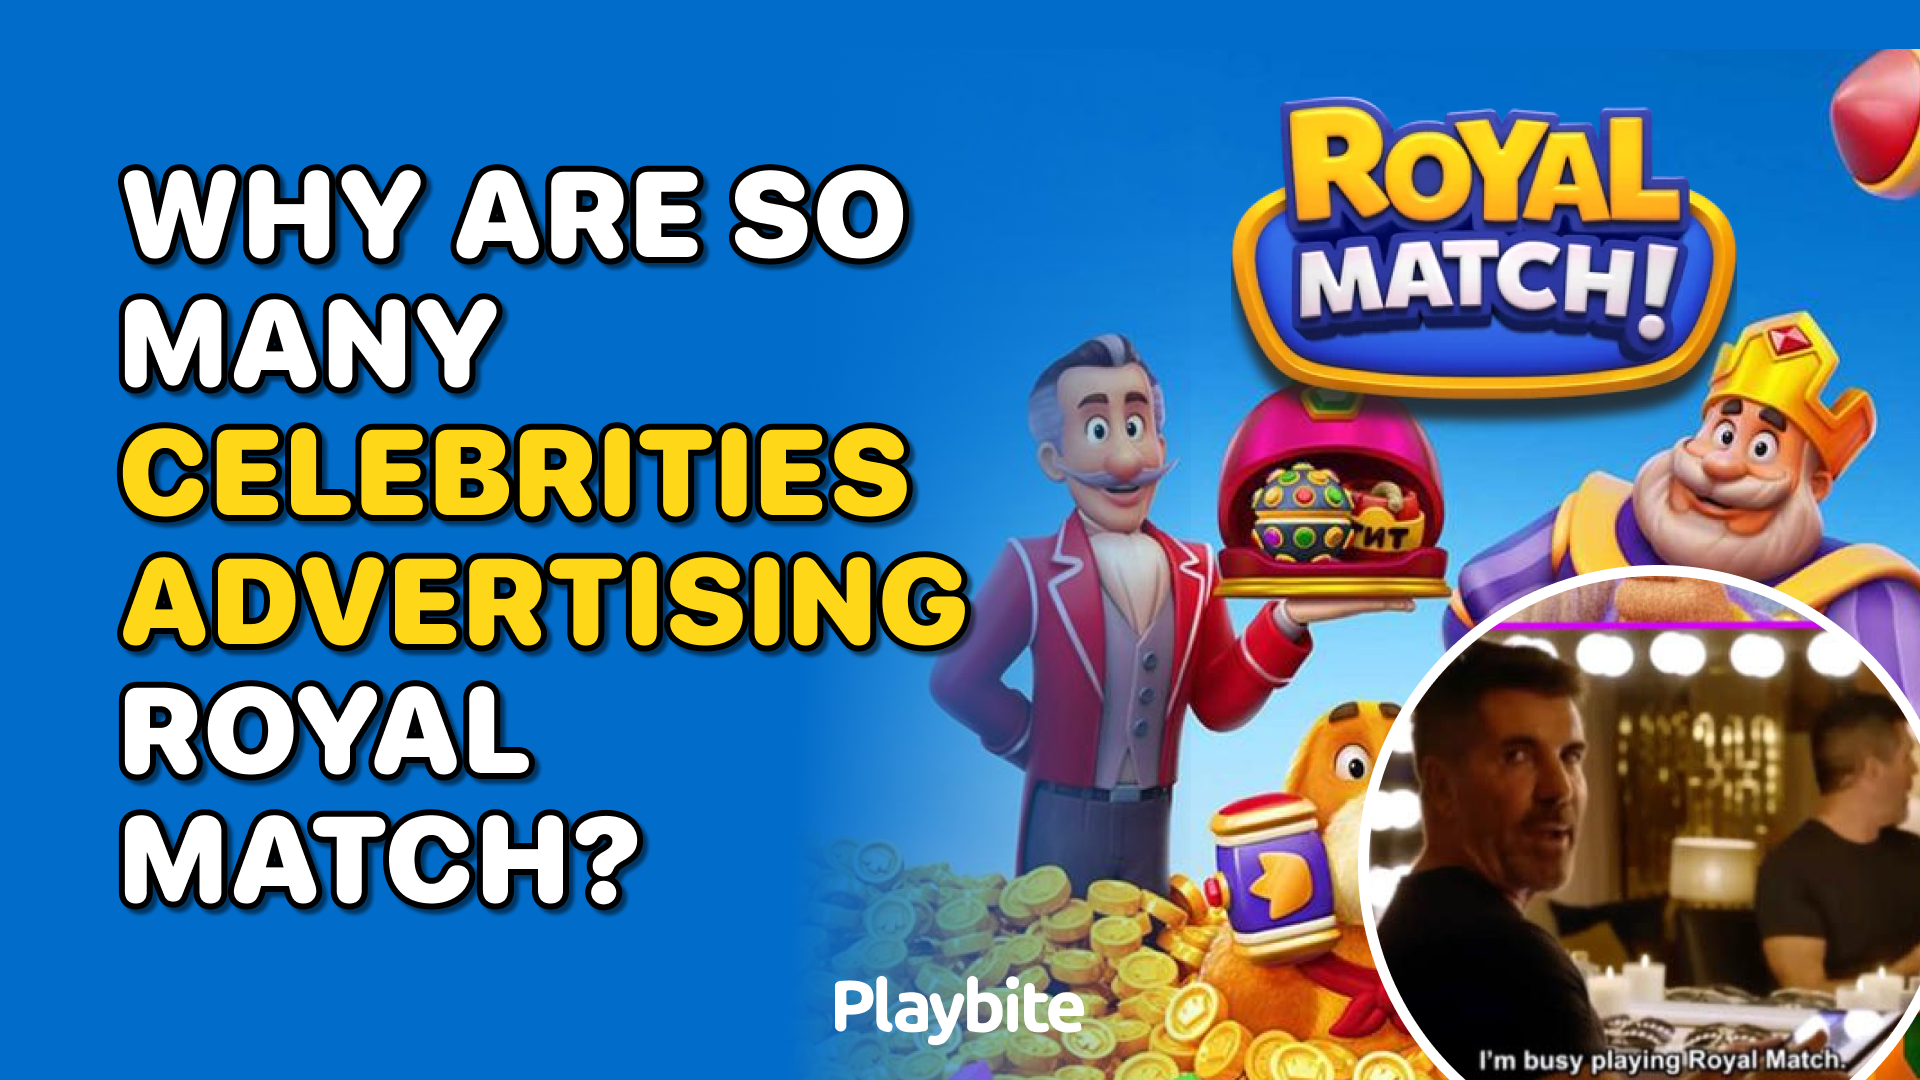 Why Are So Many Celebrities Advertising Royal Match?